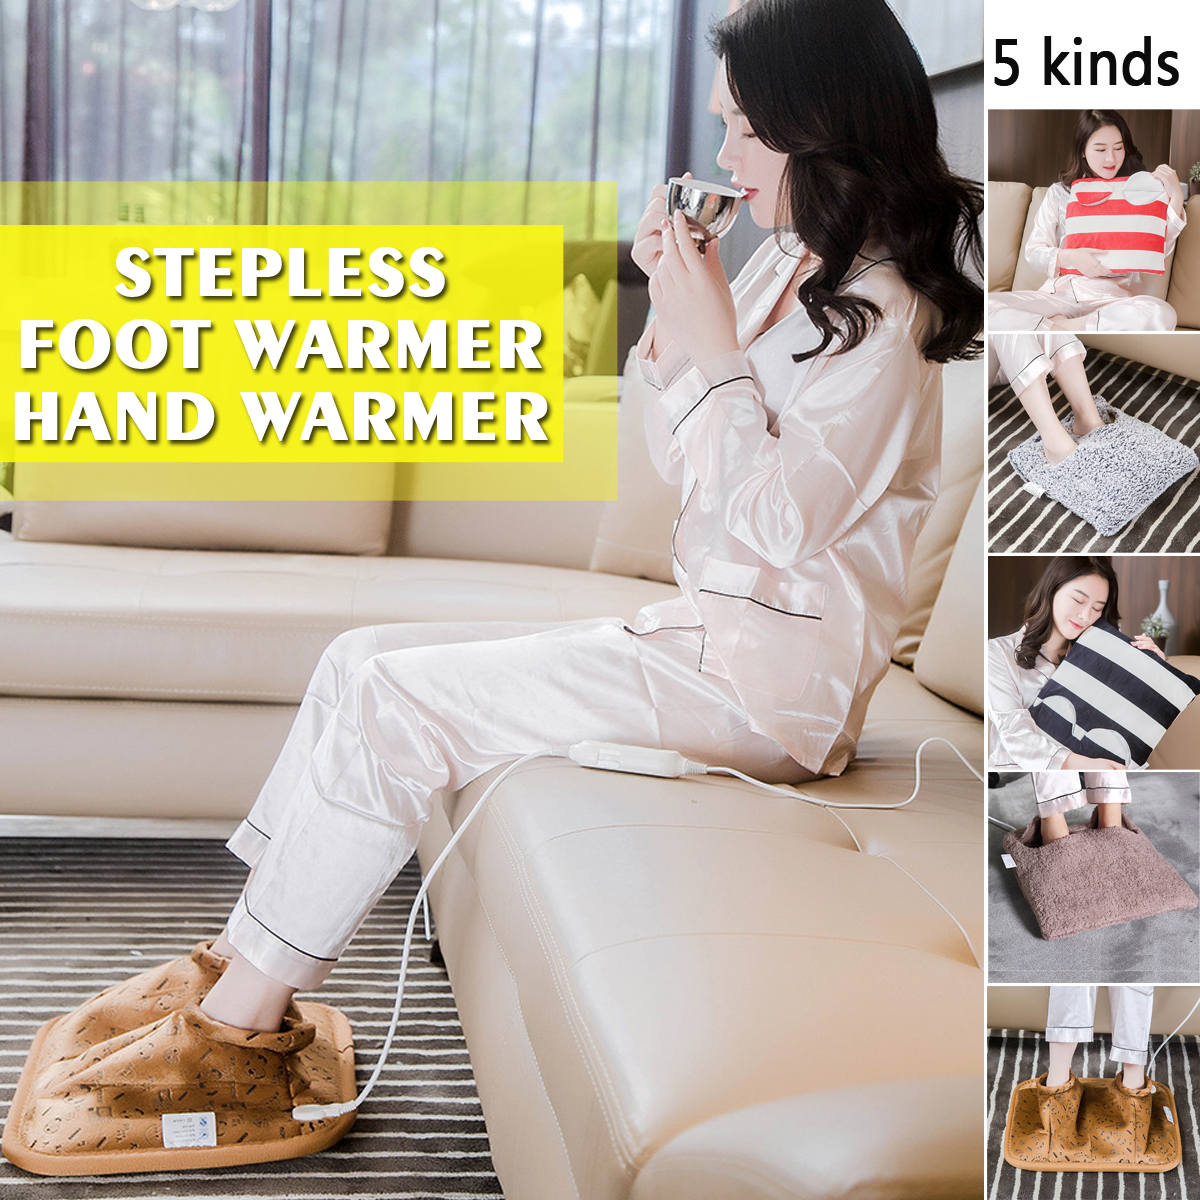 220V-Electric-Foot-Hand-Warmer-Heater-Heating-Pad-7-Speed-Stepless-Temperature-Winter-Sofa-Chair-War-1623876-1